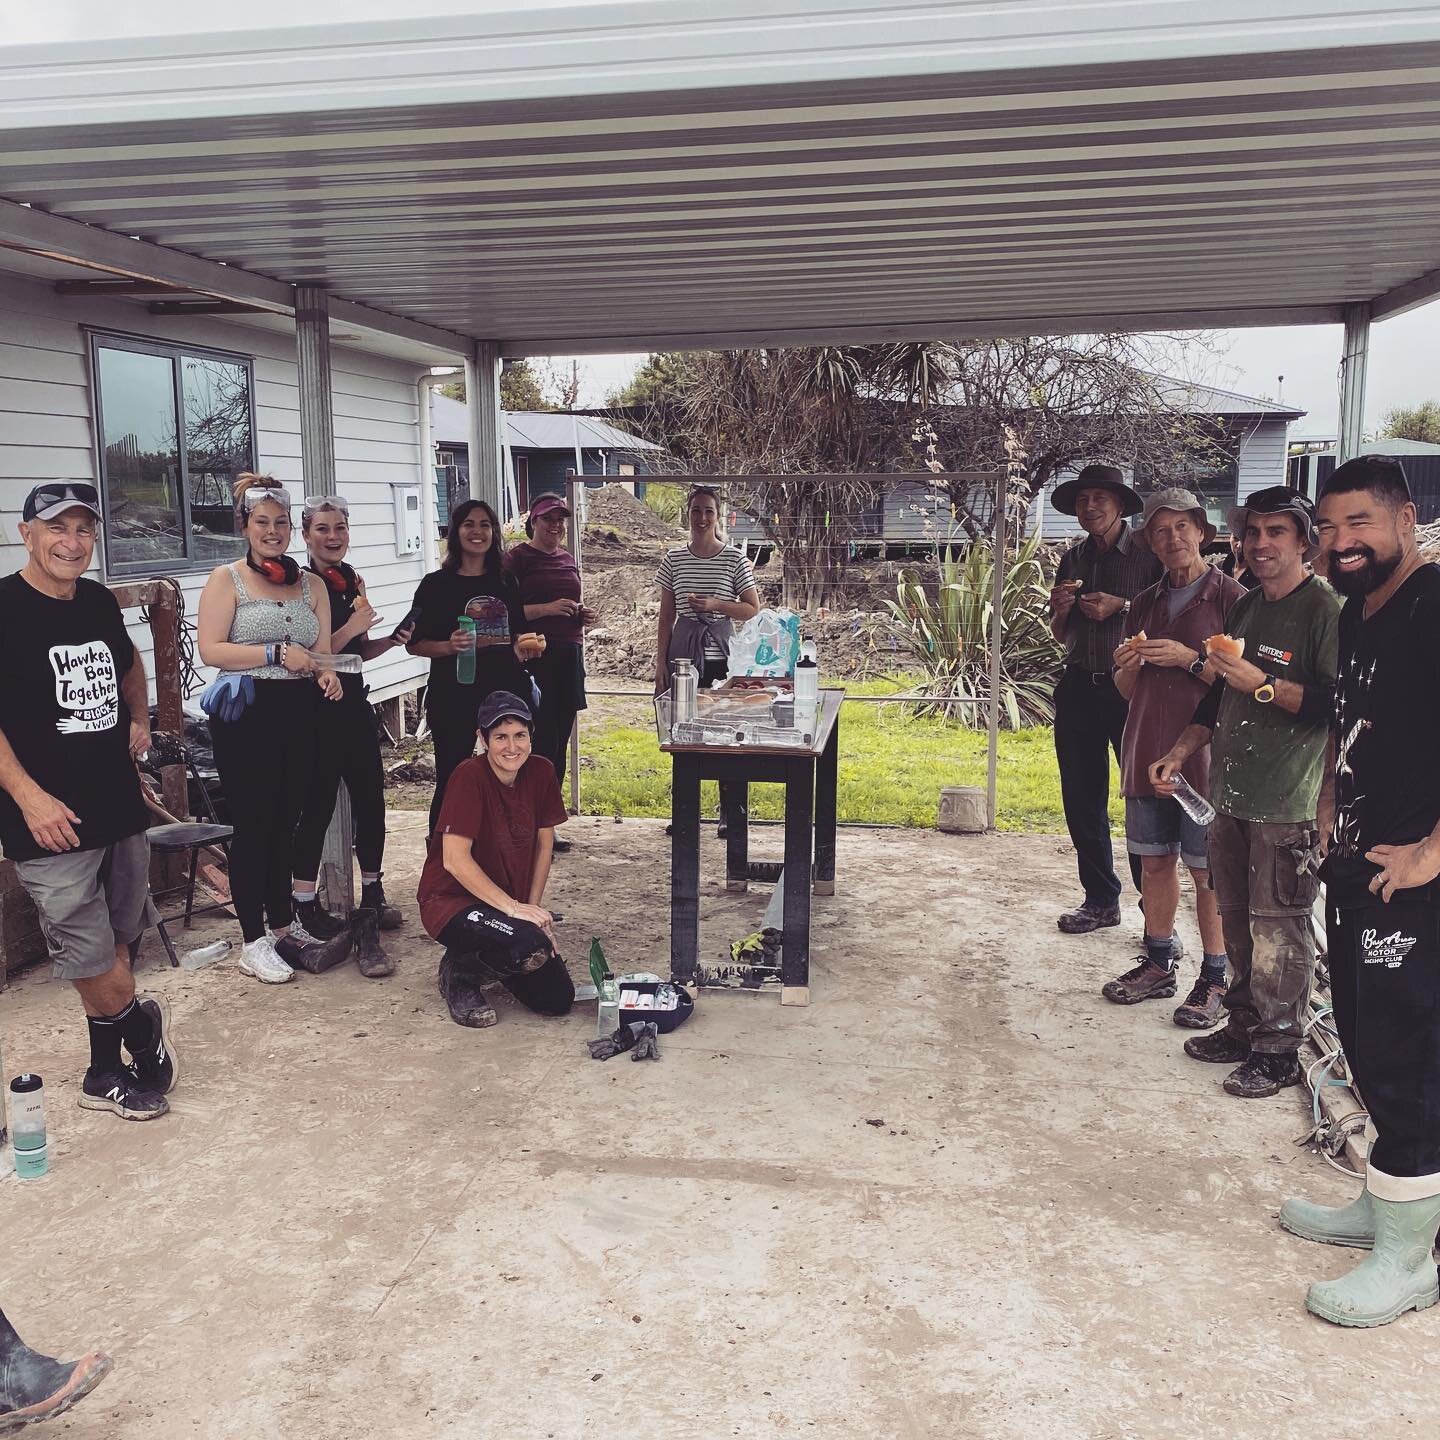 Our church has been hard at work cleaning up the debris and helping families in Waiohiki village. We've been clearing silt, repairing fences, and providing a general hand to those in need. It's been a humbling experience to see our church come togeth